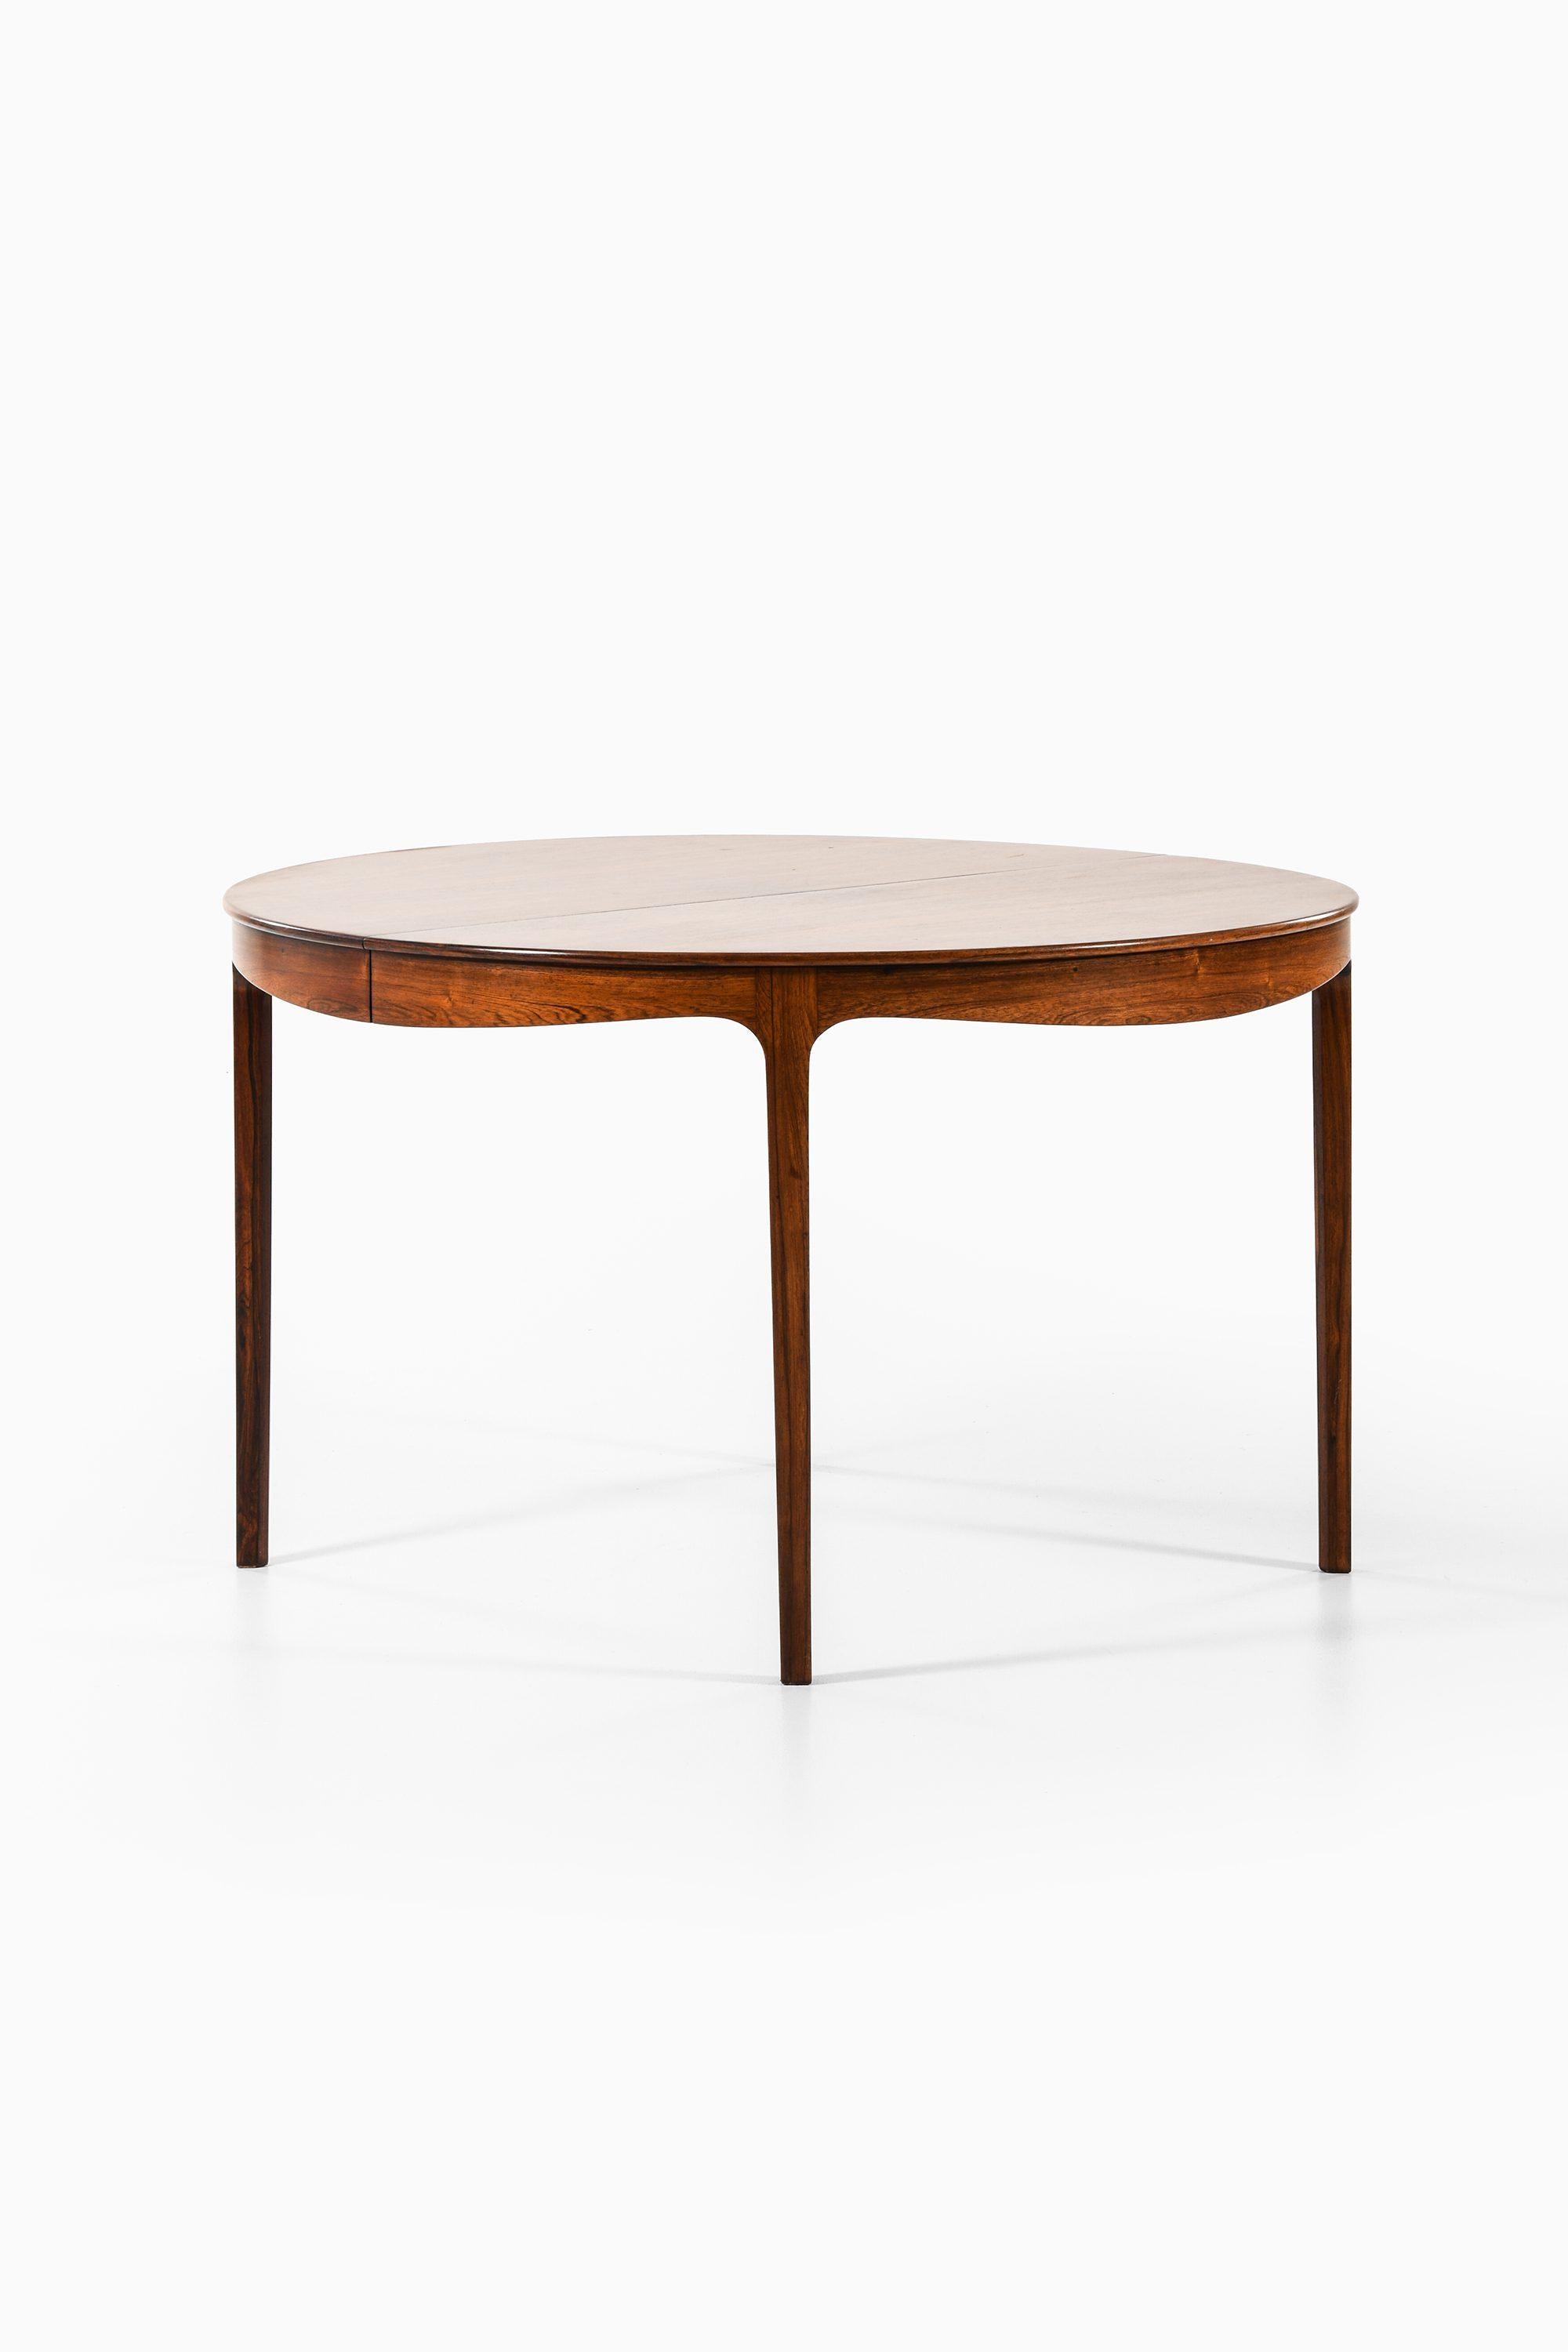 Dining Table in Rosewood by Ole Wanscher, 1945

Additional Information:
Material: Rosewood
Style: Mid century, Scandinavian
Produced by cabinetmaker A.J. Iversen in Denmark
Dimensions (W x D x H): 125 [185] x 125 x 74 cm
Condition: Good vintage